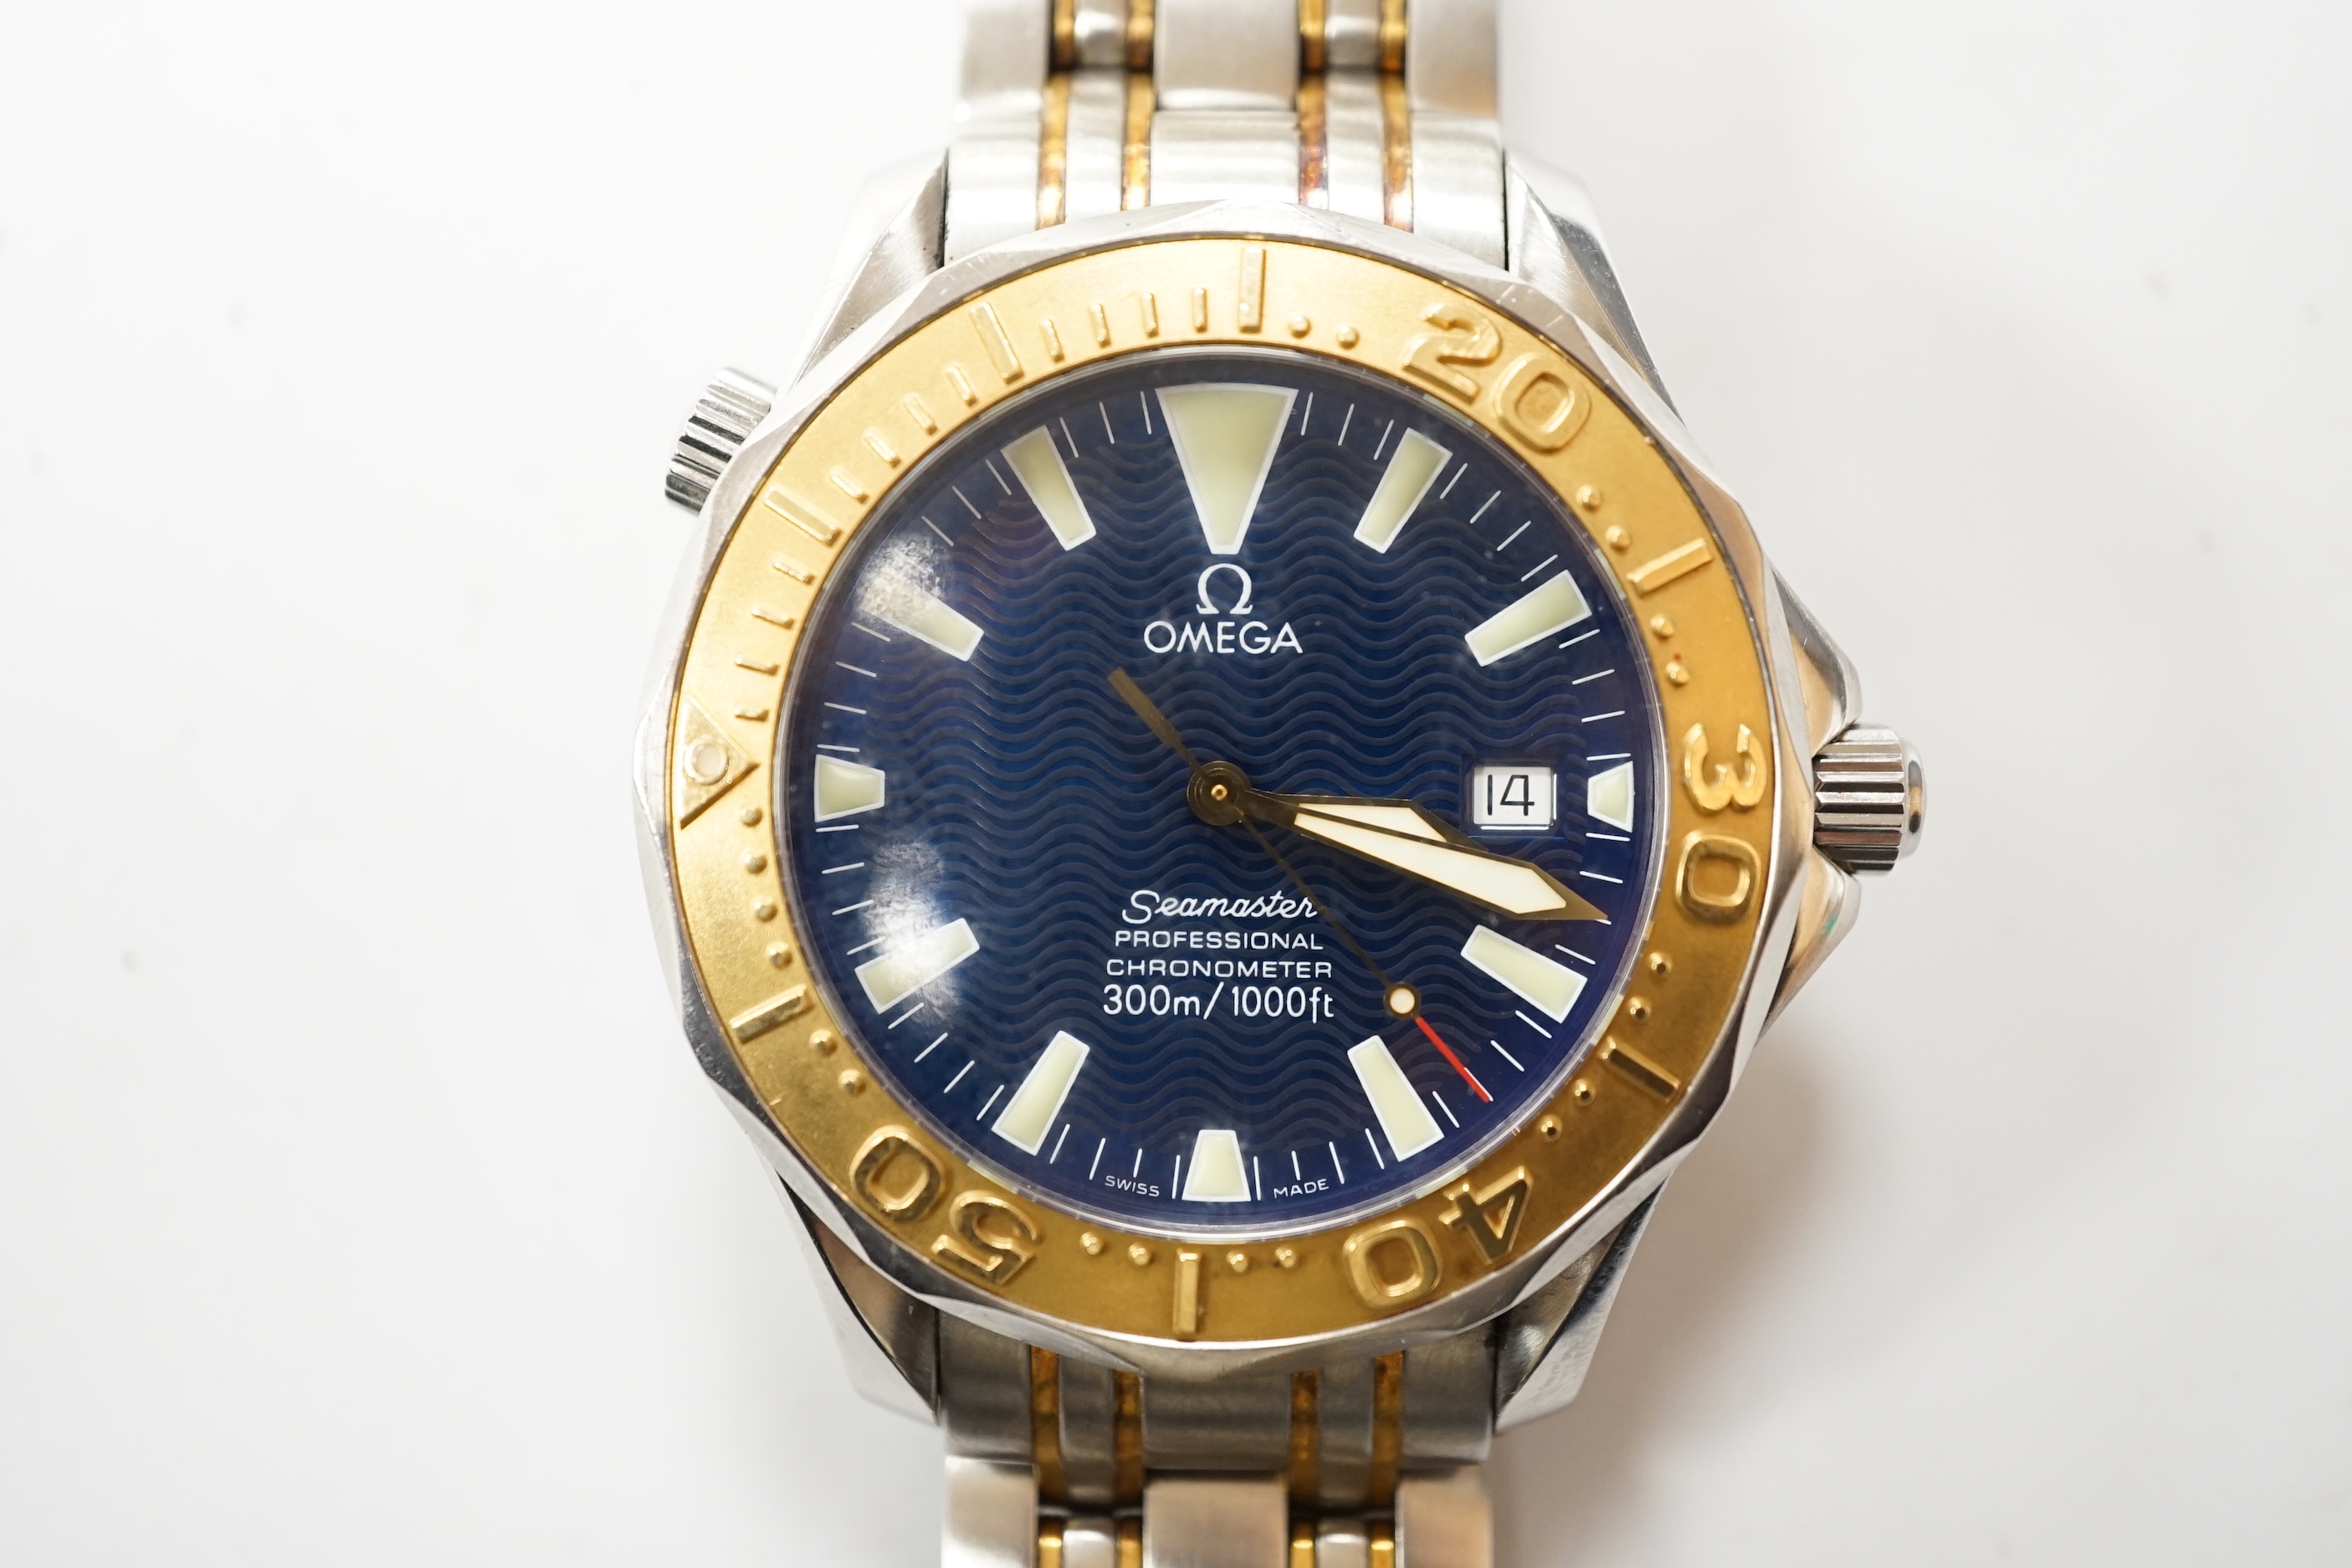 A gentleman's 2006 stainless steel Omega Seamaster Professional Chronometer wrist watch, on stainless steel Omega bracelet, case diameter 42mm, with box, no papers.